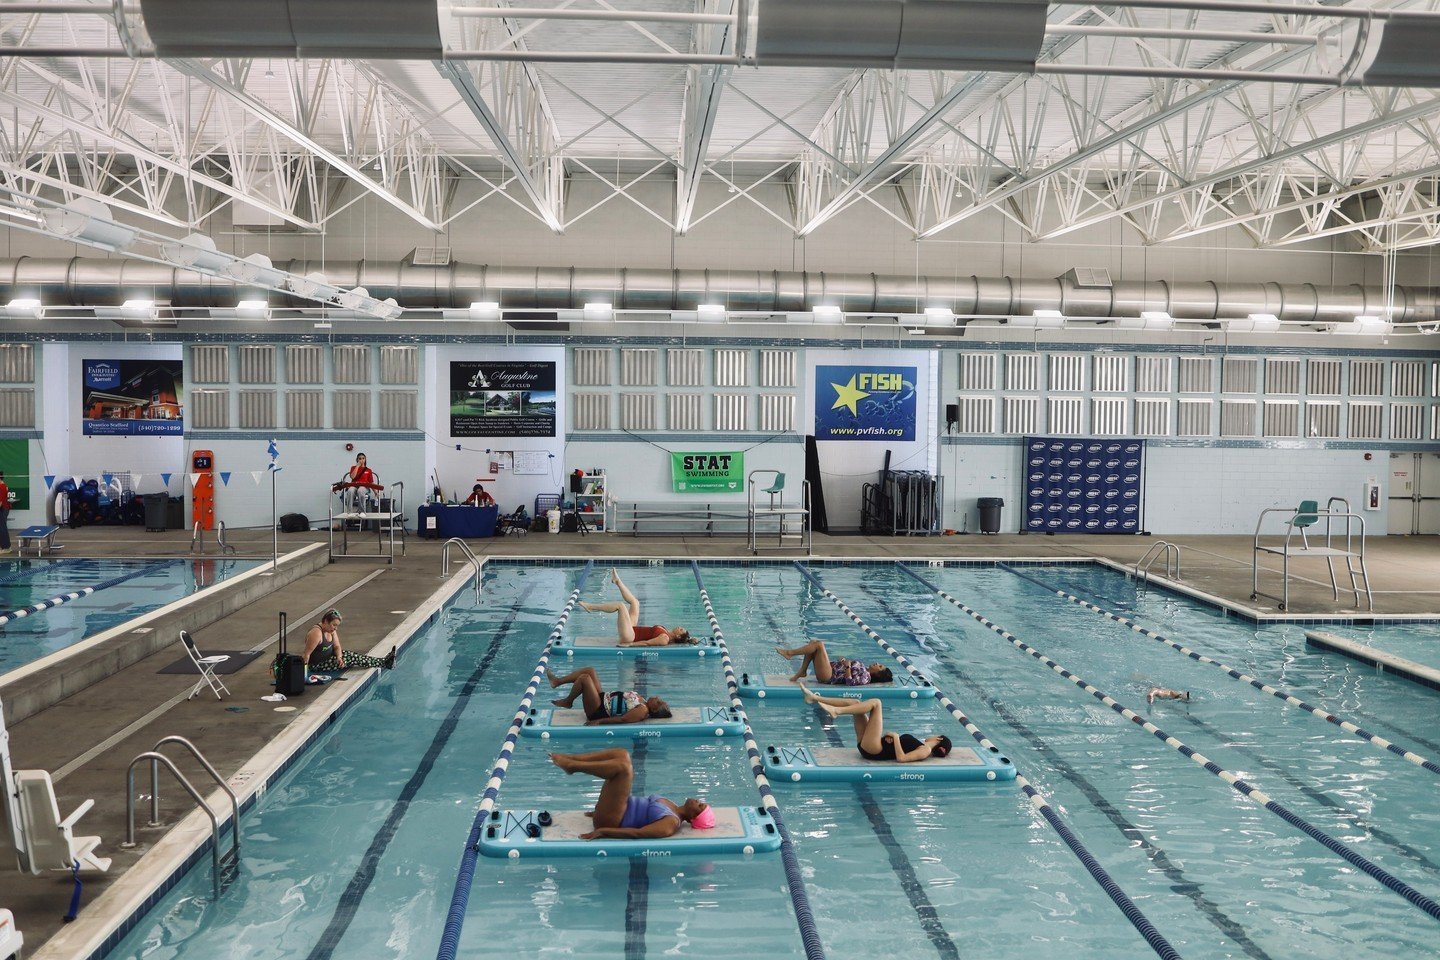 Get ready for 2️⃣ Aqua Board classes next month! 

Join us on 5/11 and 5/25 at 10A for a refreshing workout in the shallow recreational pool. Registration required - click the link in our bio to sign up! 

*Participants should feel confident in the w